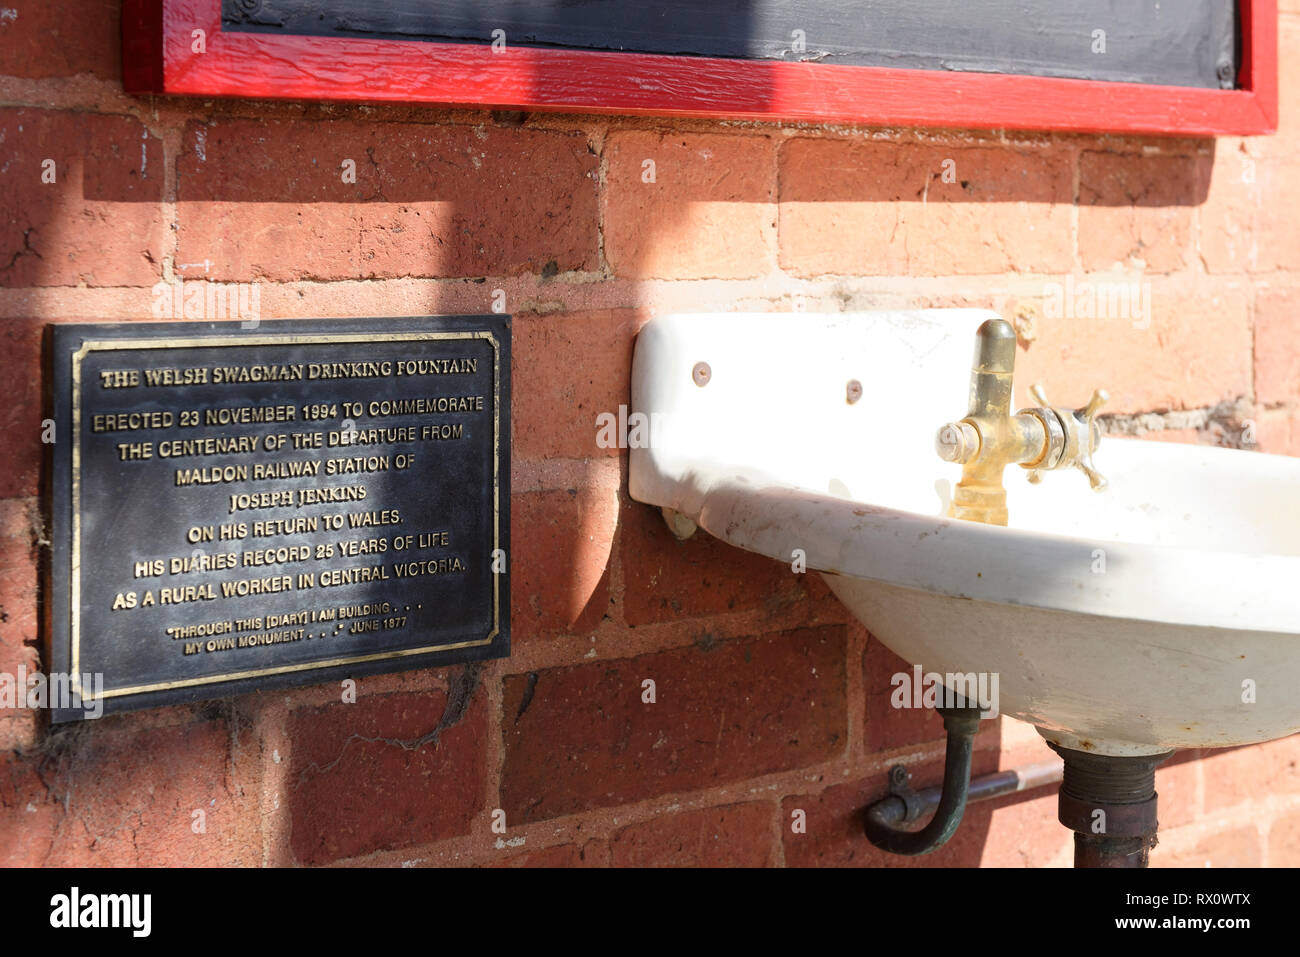 The Welsh Swagman Drinking Fountain on the platform of the Maldon railway station, Victoria, Australia. Opened in 1884, the historic Railway Station s Stock Photo